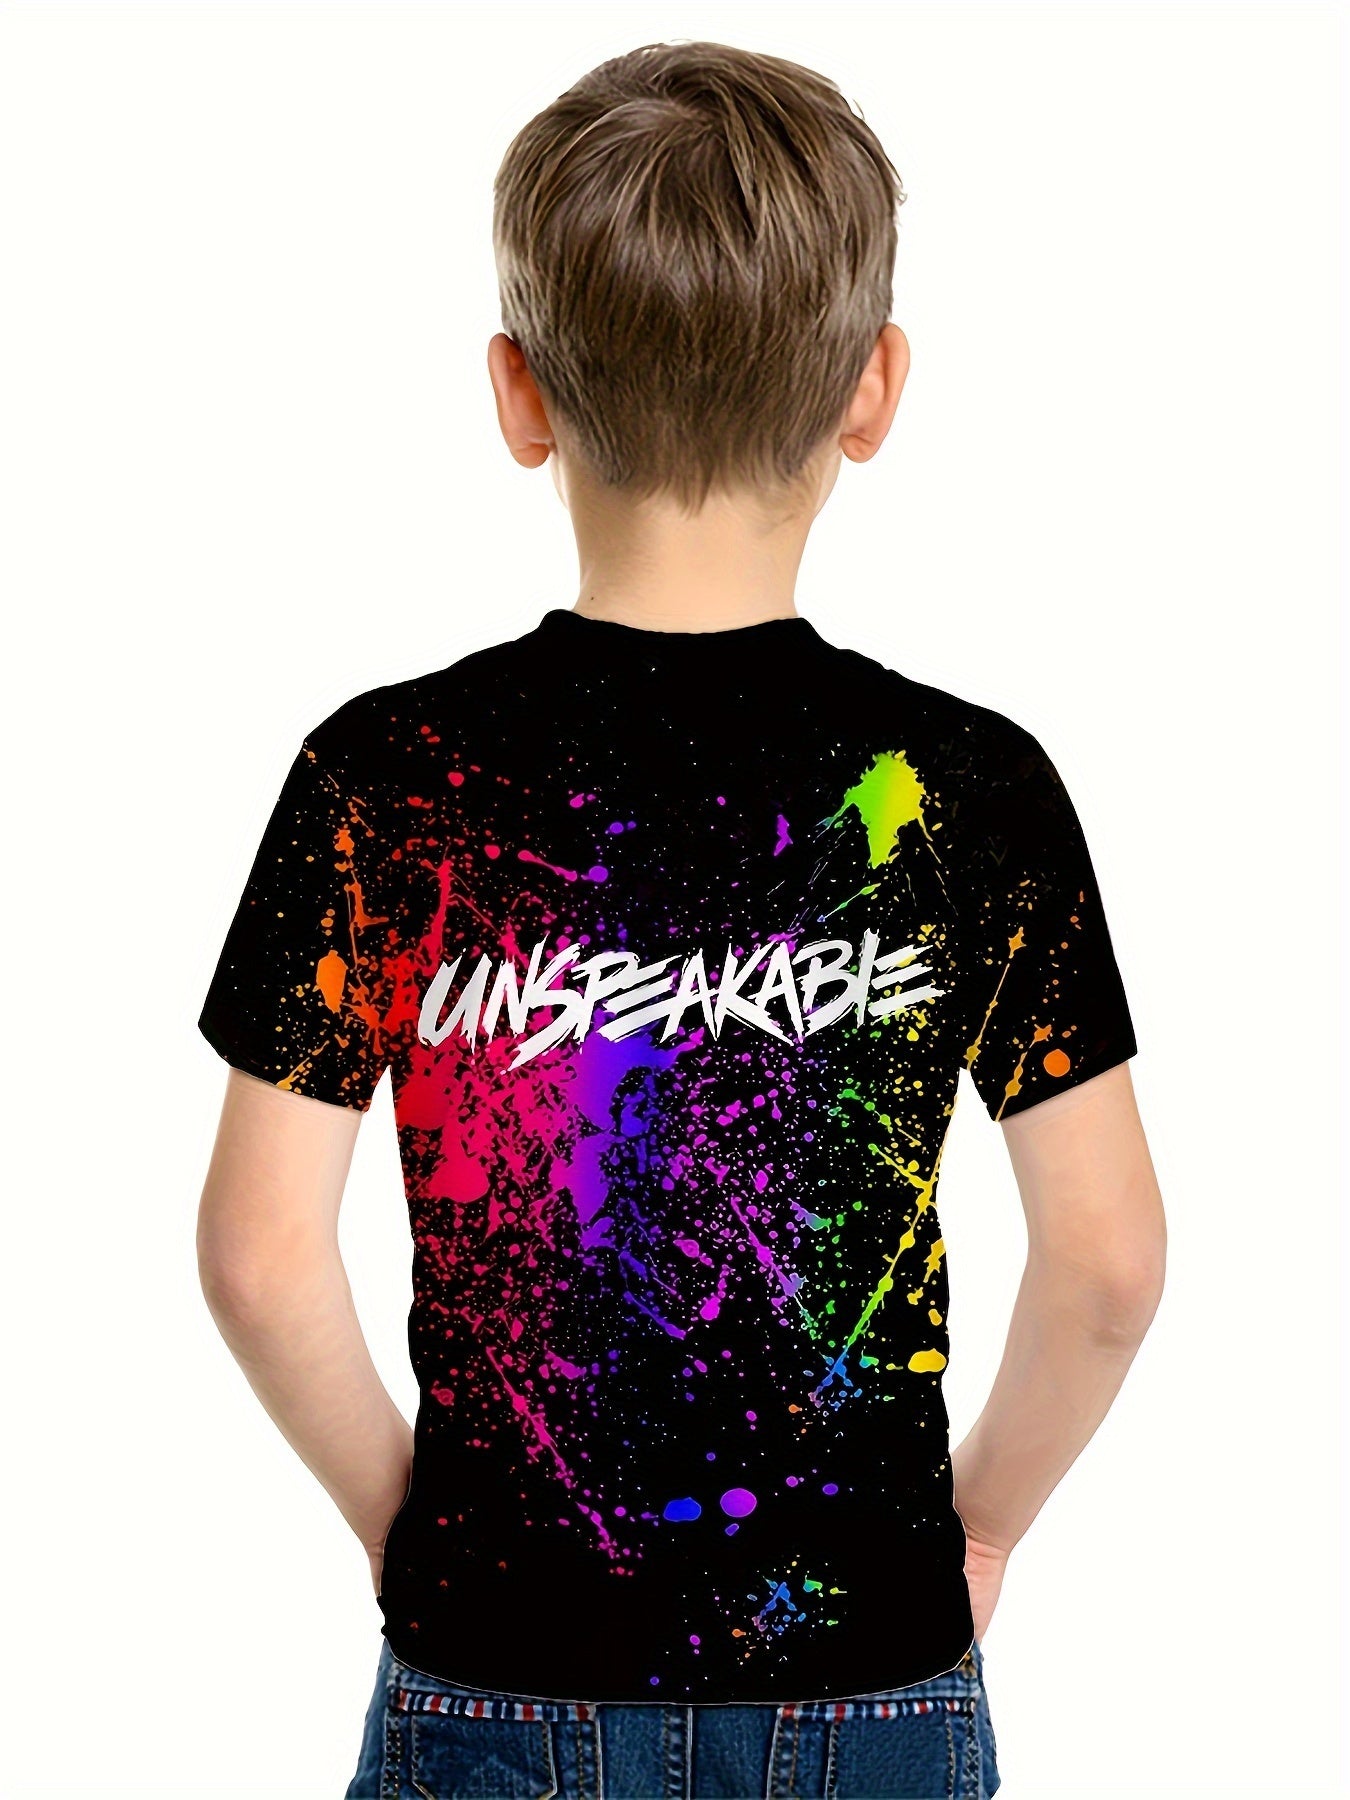 Paint Splash Pattern Kid's T-shirt, UNSPEAKABLE Print Casual Short Sleeve Top, Unisex Tee, Girl's & Boy's Clothes For Summer